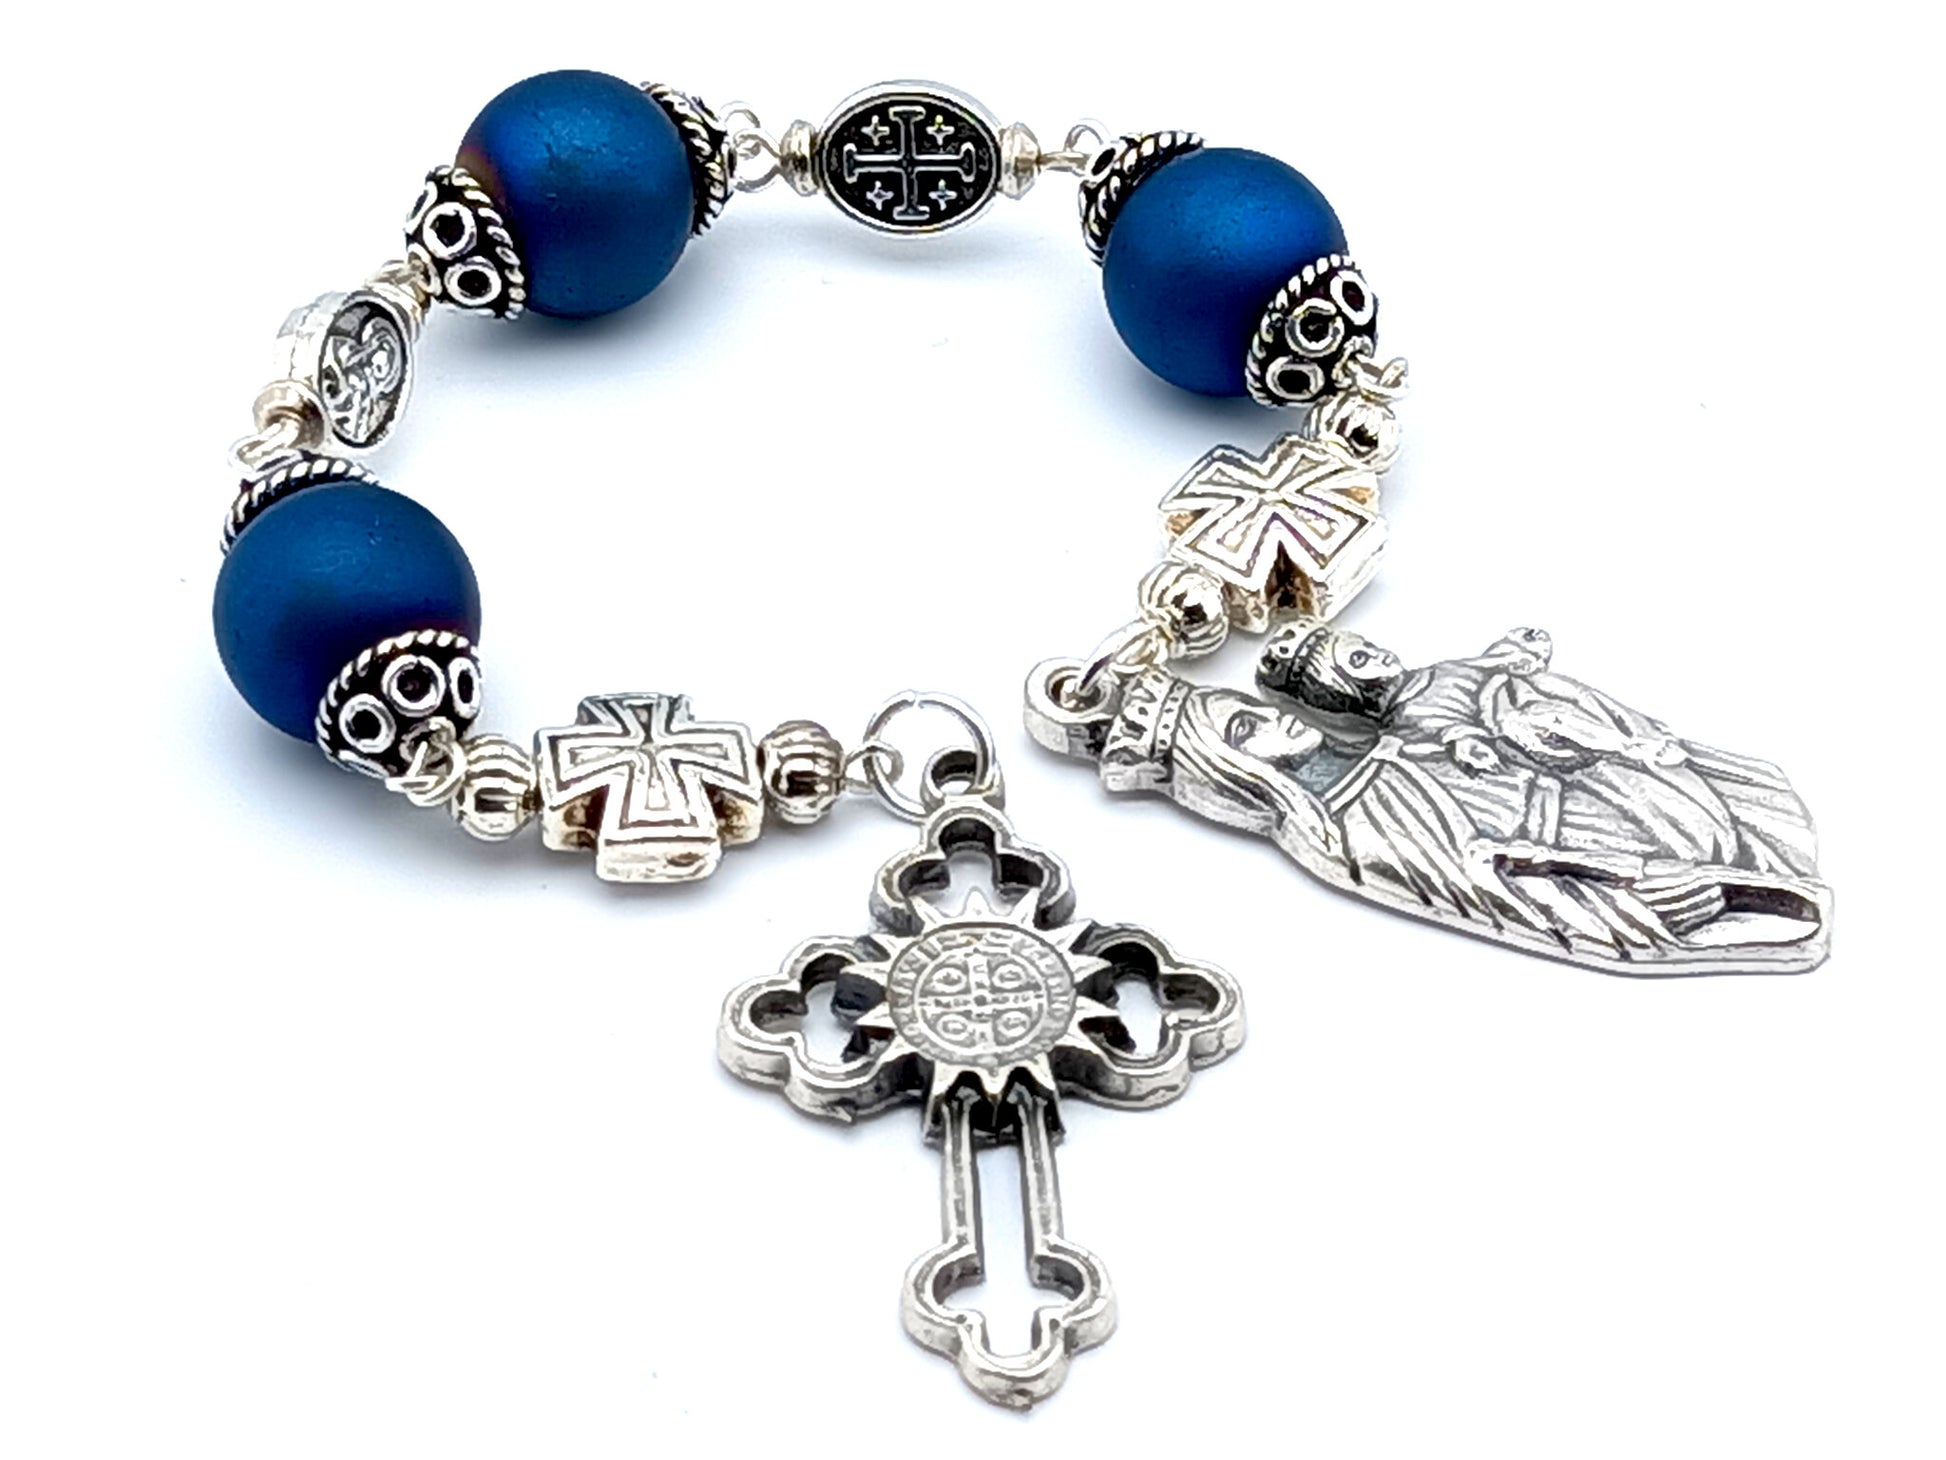 Our Lady of Victory unique rosary beads with blue glass and silver beads with Saint Benedict crucifix.